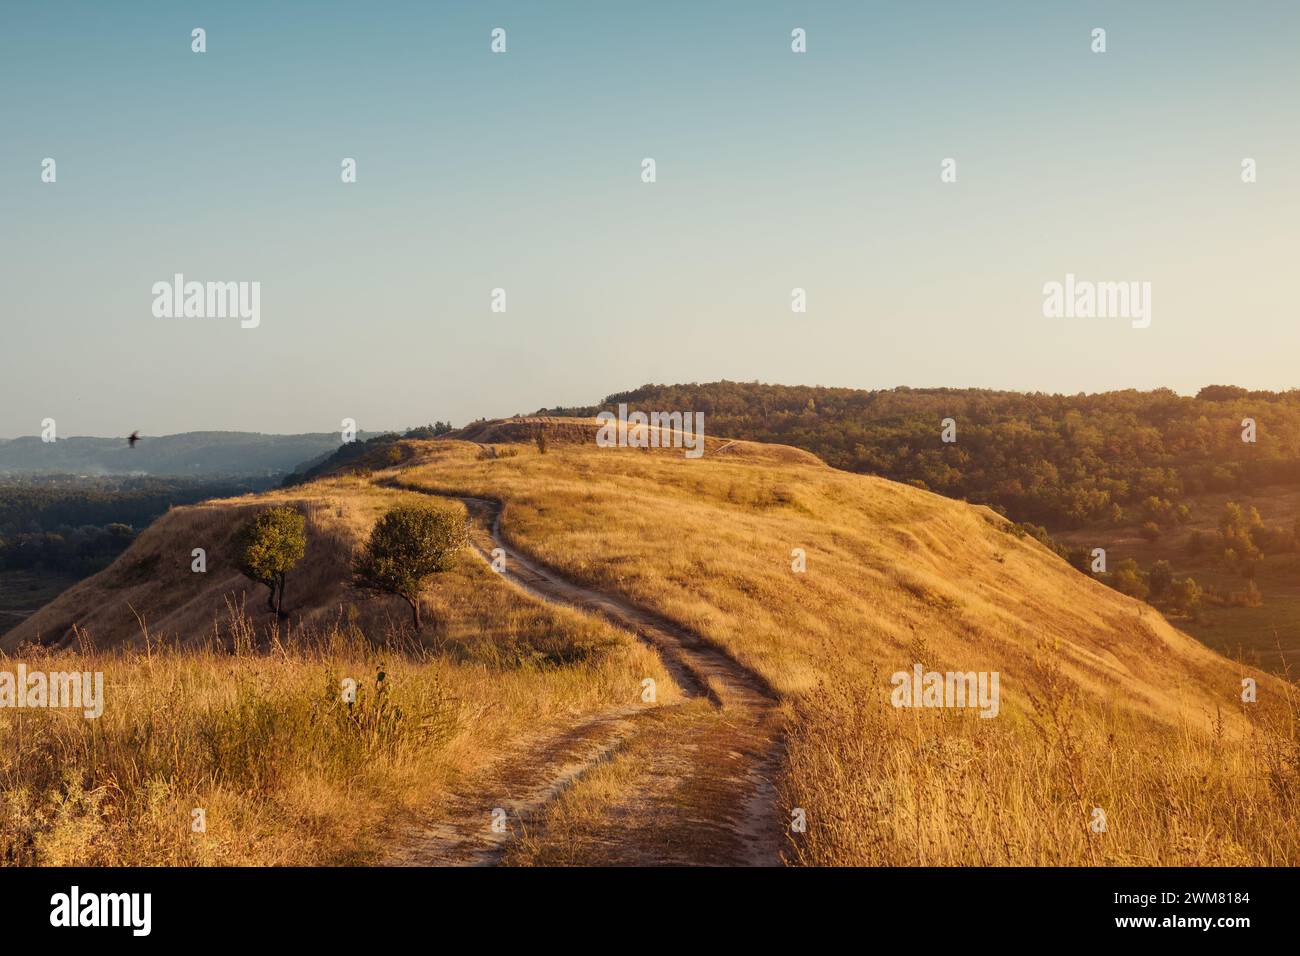 Trail on top of the hill. Unpaved winding dirt road through hilly terrain. Stock Photo